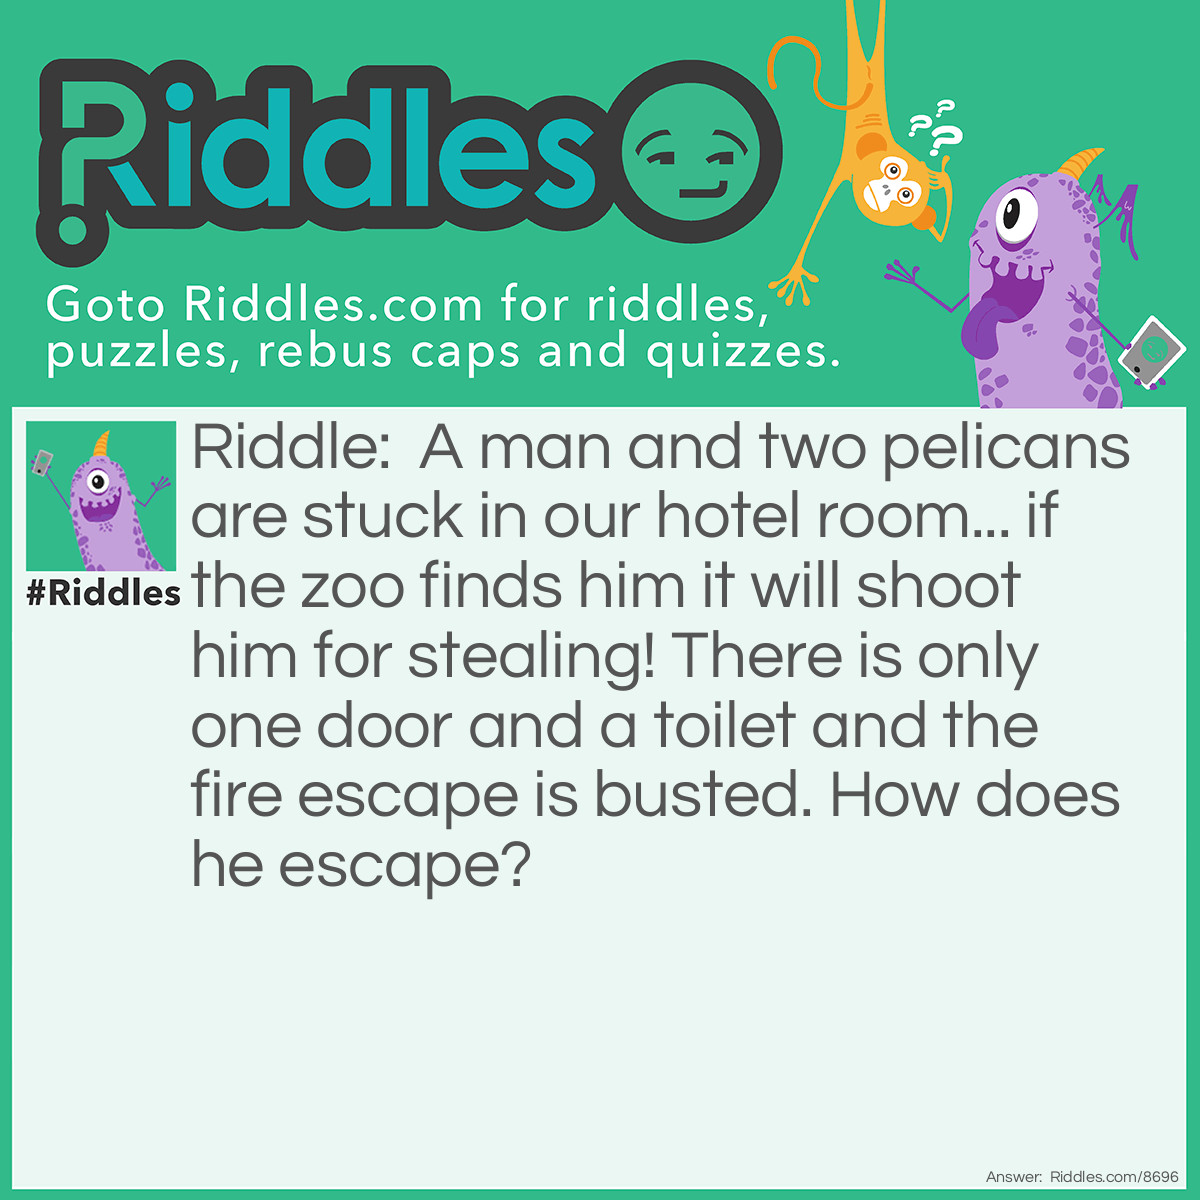 Riddle: A man and two pelicans are stuck in our hotel room... if the zoo finds him it will shoot him for stealing! There is only one door and a toilet and the fire escape is busted. How does he escape? Answer: Hide in the pelicans mouths of course! (One pelican is too small for a whole person but two might be enough)